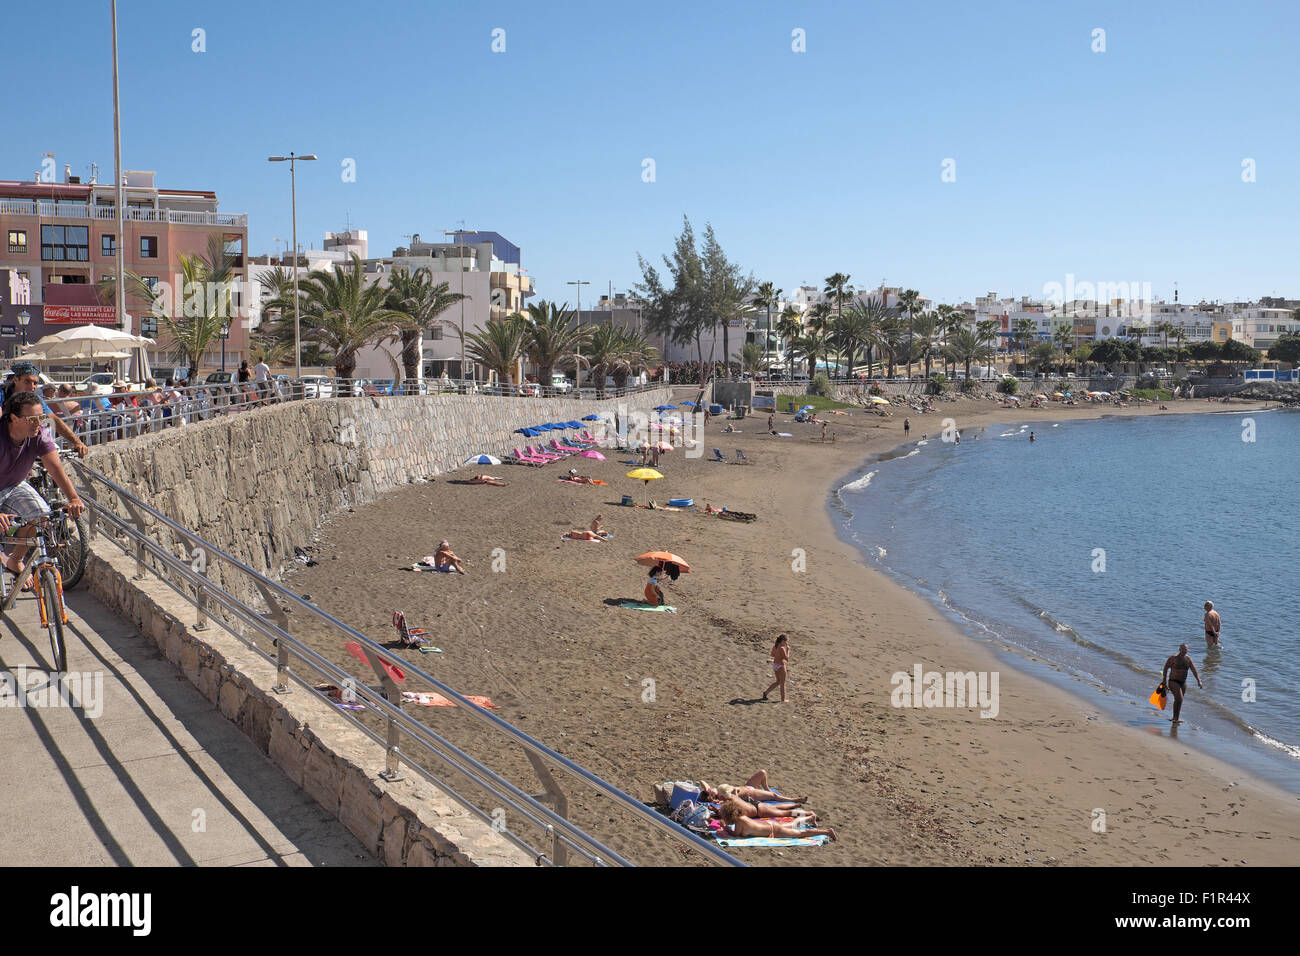 View of the beach and waterfront, Arguineguin, Gran Canaria, Canary Islands, Spain. Stock Photo